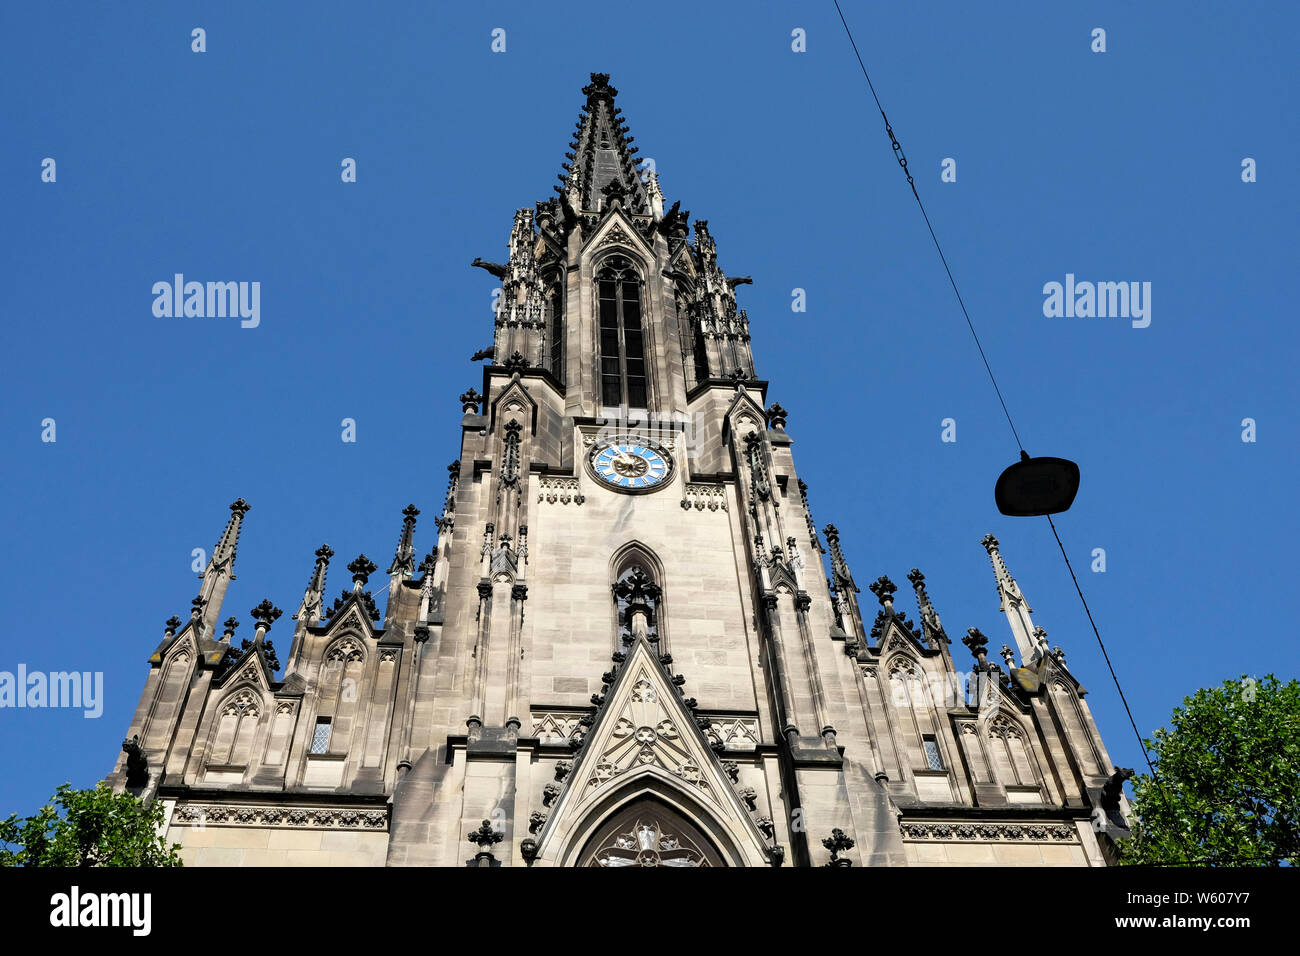 A close up view of Elisabethenkirche in Basel, Switzerland Stock Photo